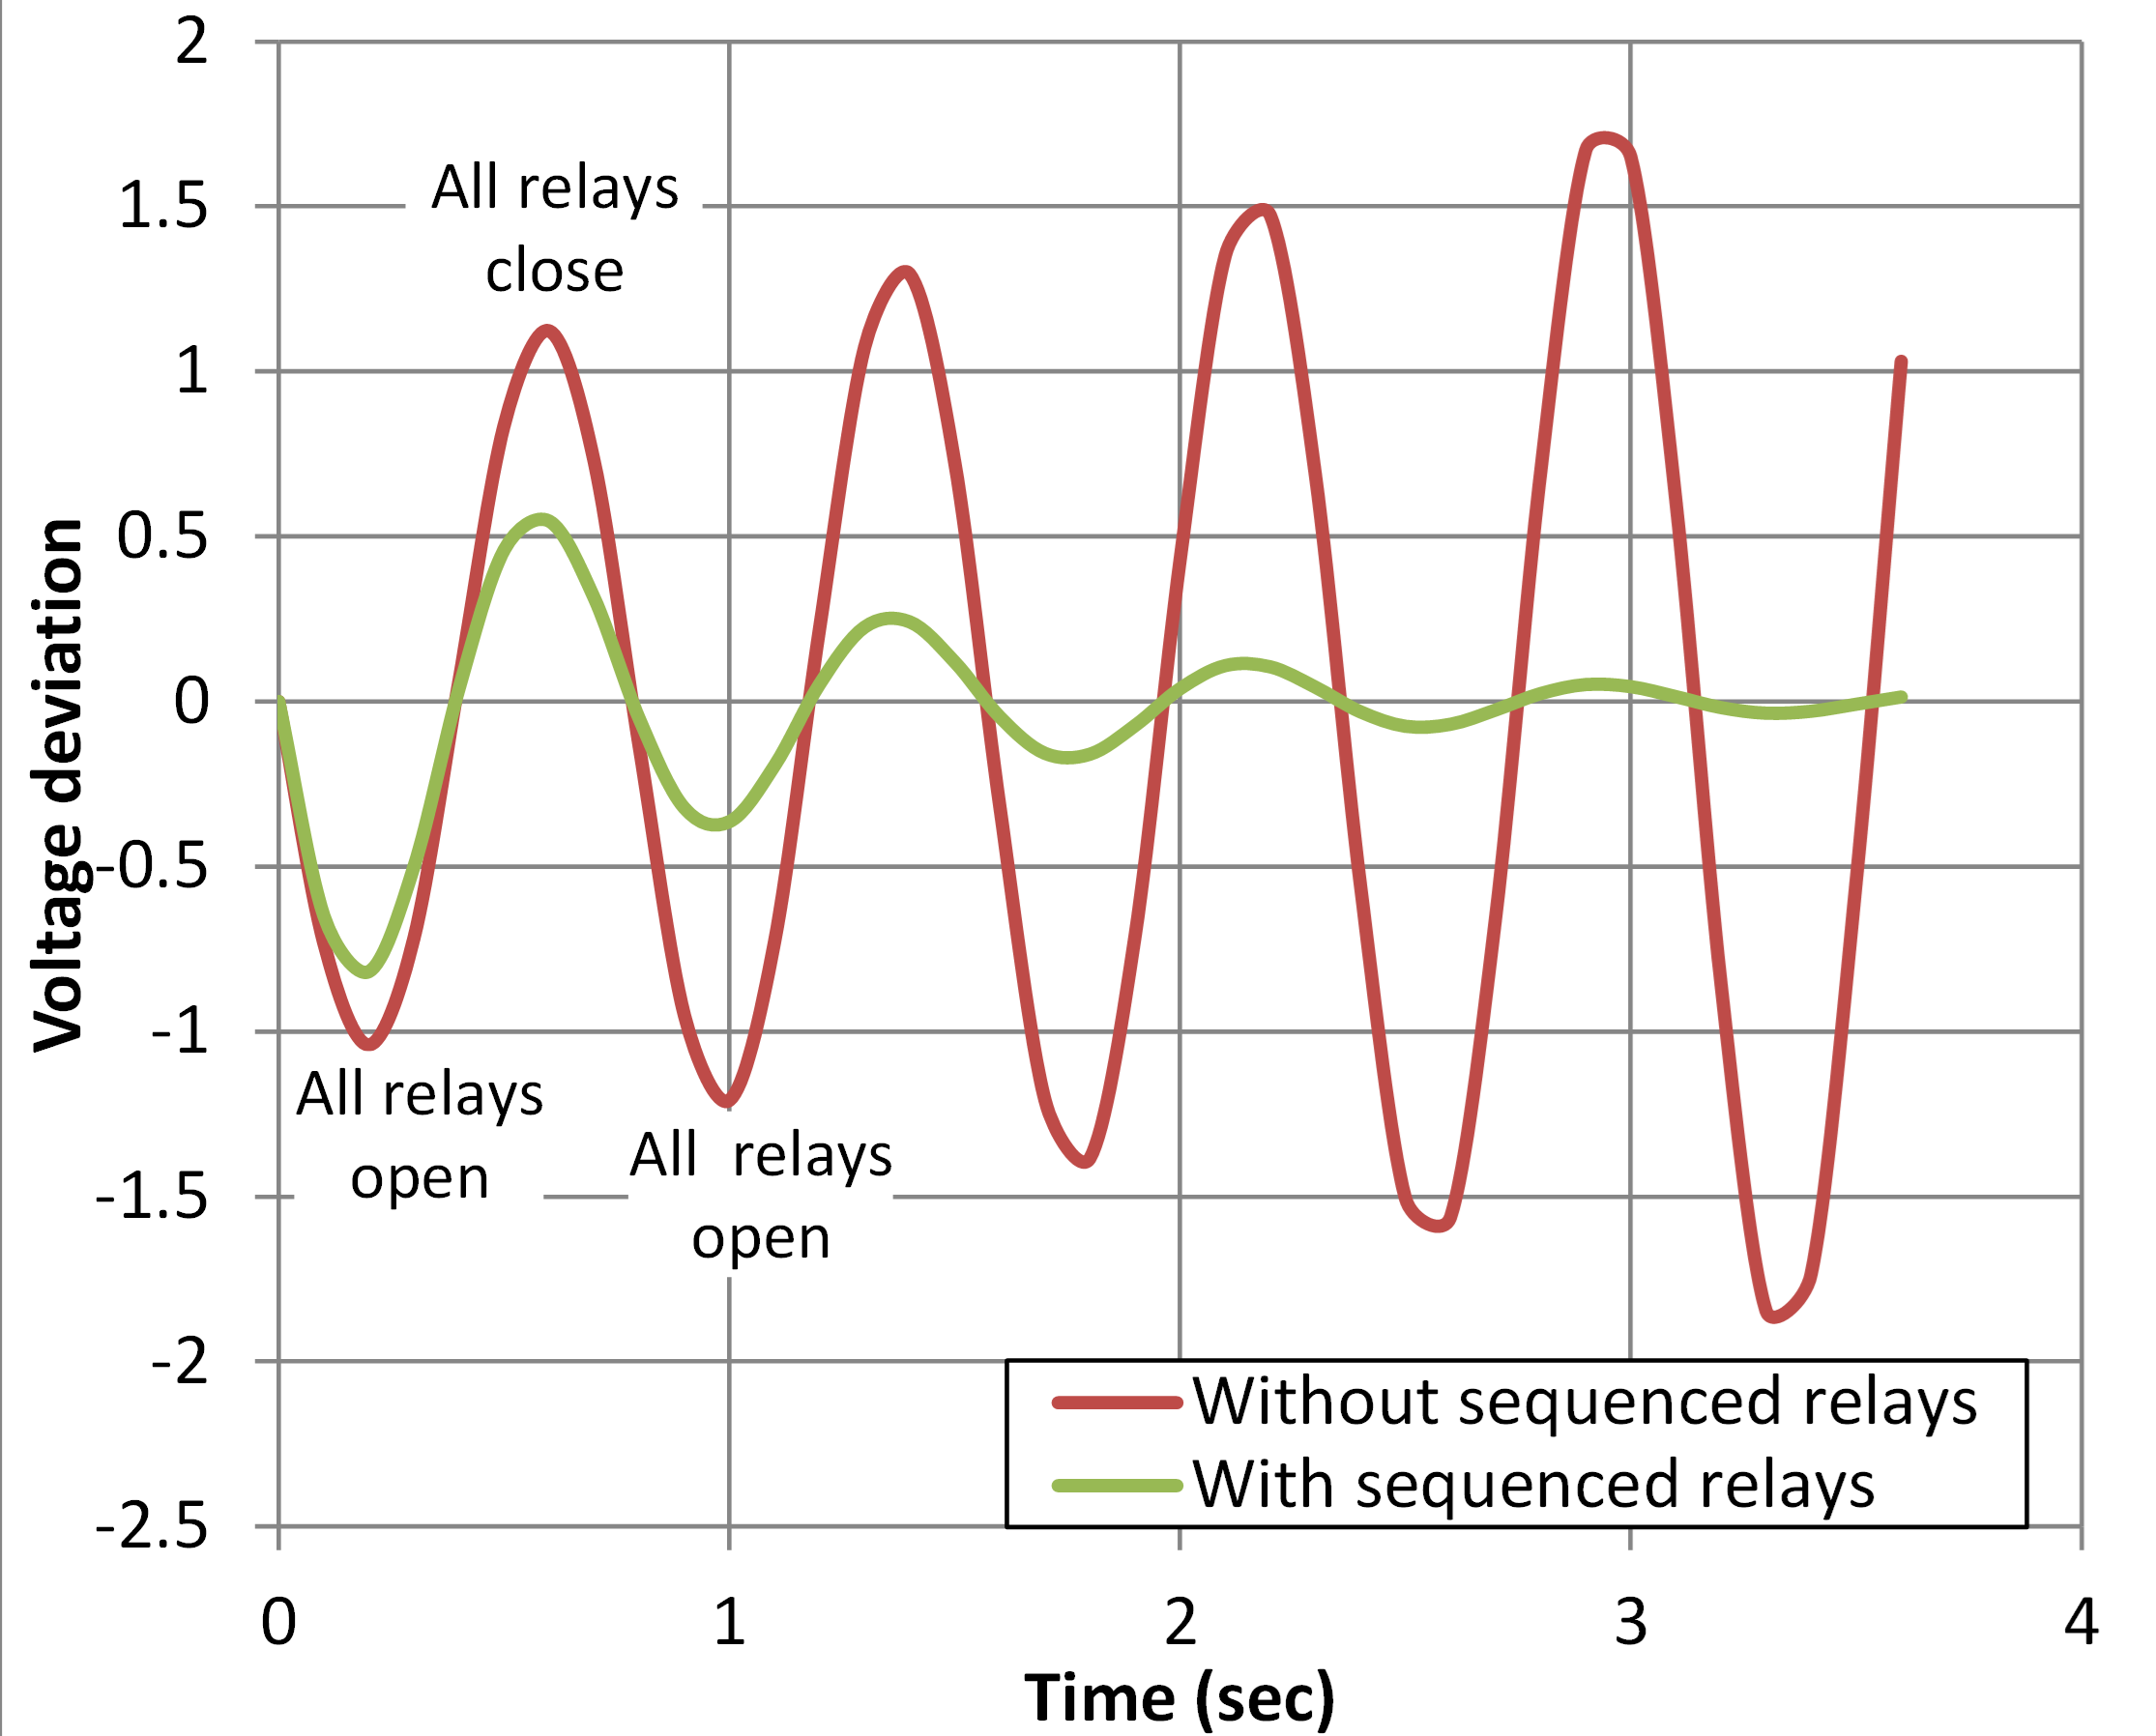 Relays with randomized setpoints can reduce oscillations in voltage deviations